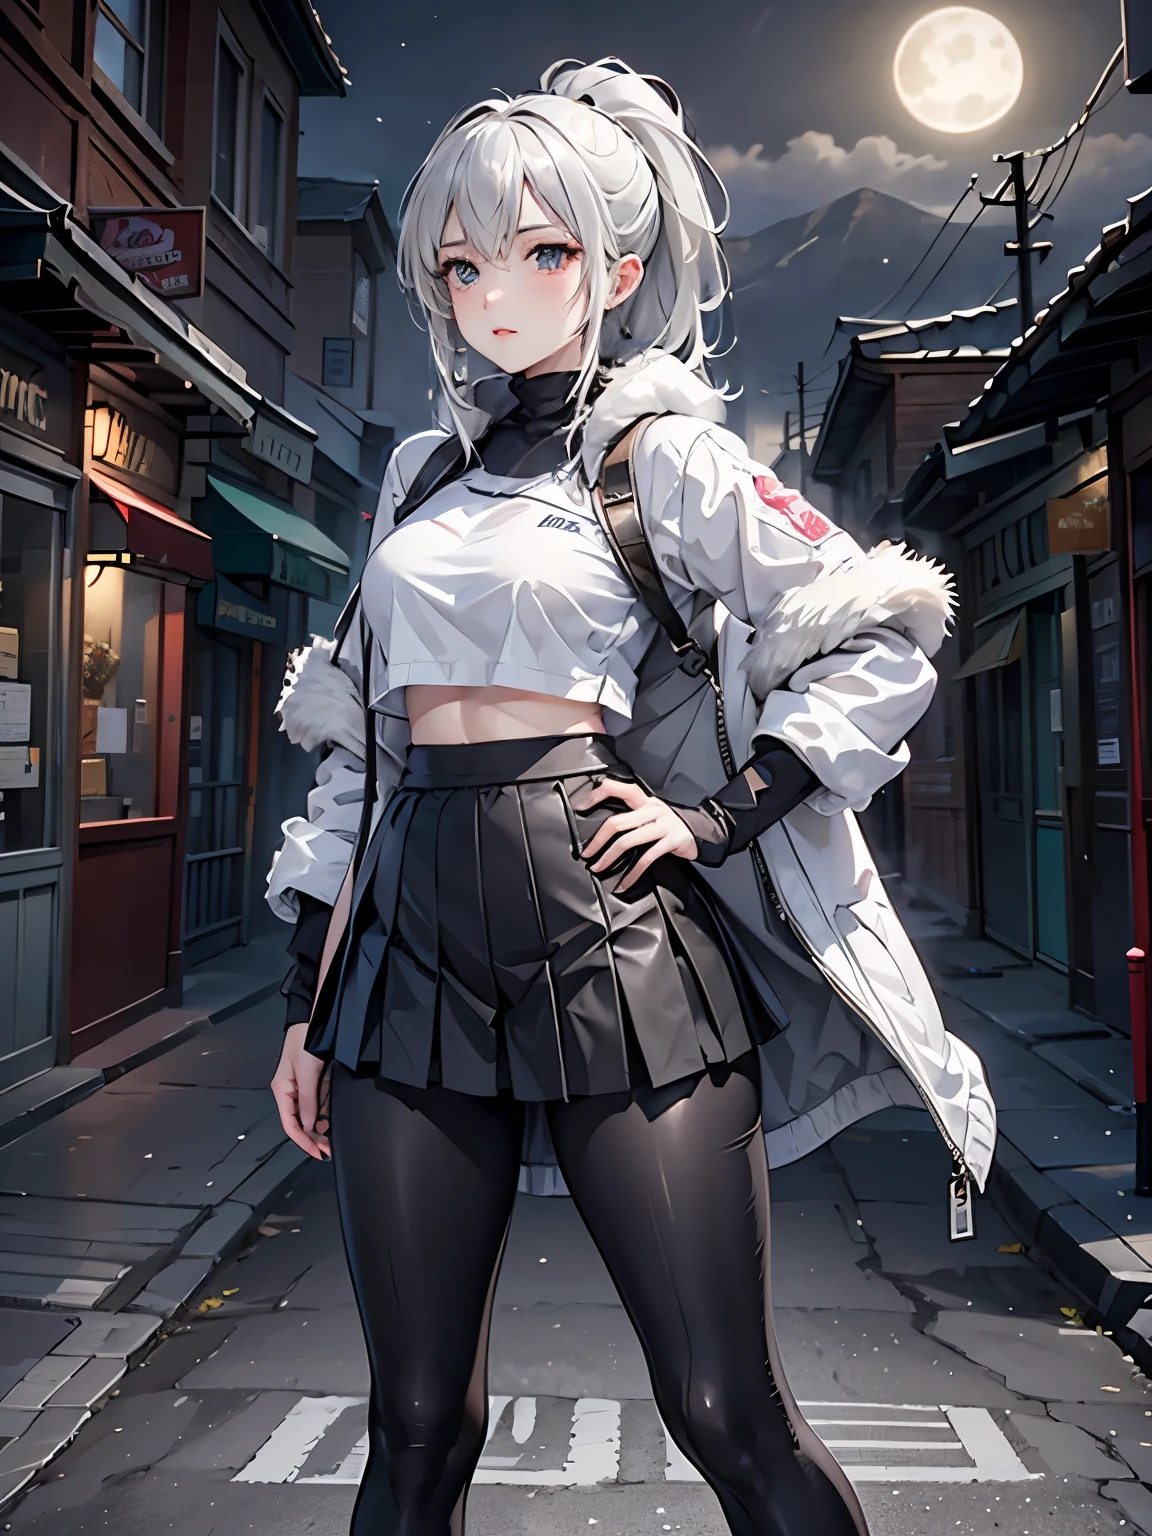 a woman, leggings, pleated skirt, sports top, high ponytail, high boots, long fur jacket, on a foggy moonlit night in a ghost town, monochrome style, lineart